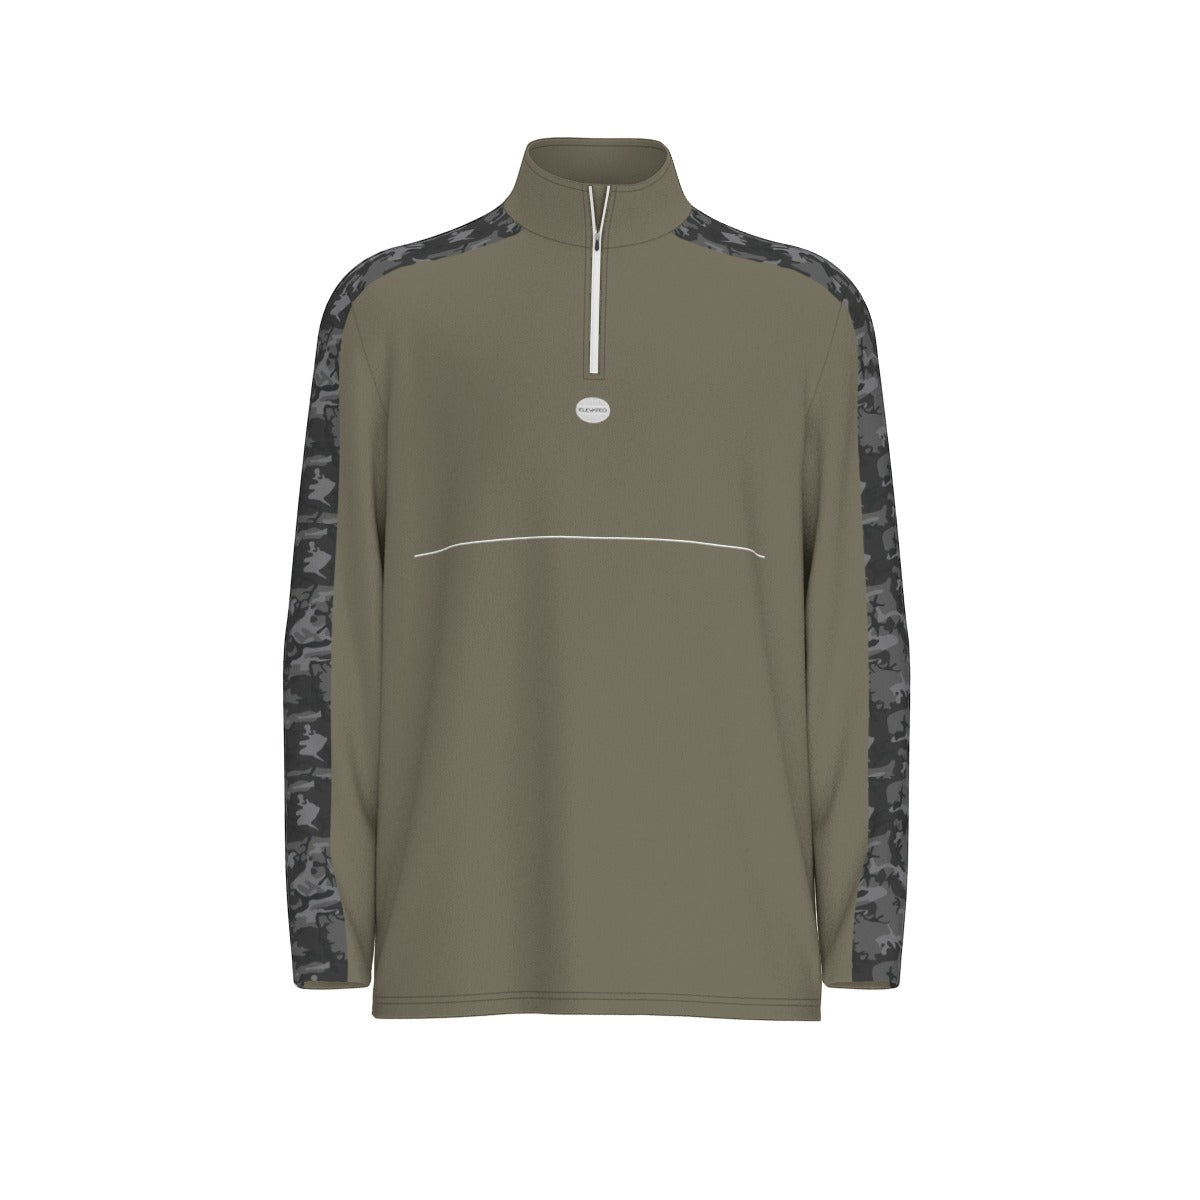 Elevated athletic stand up quarter zip